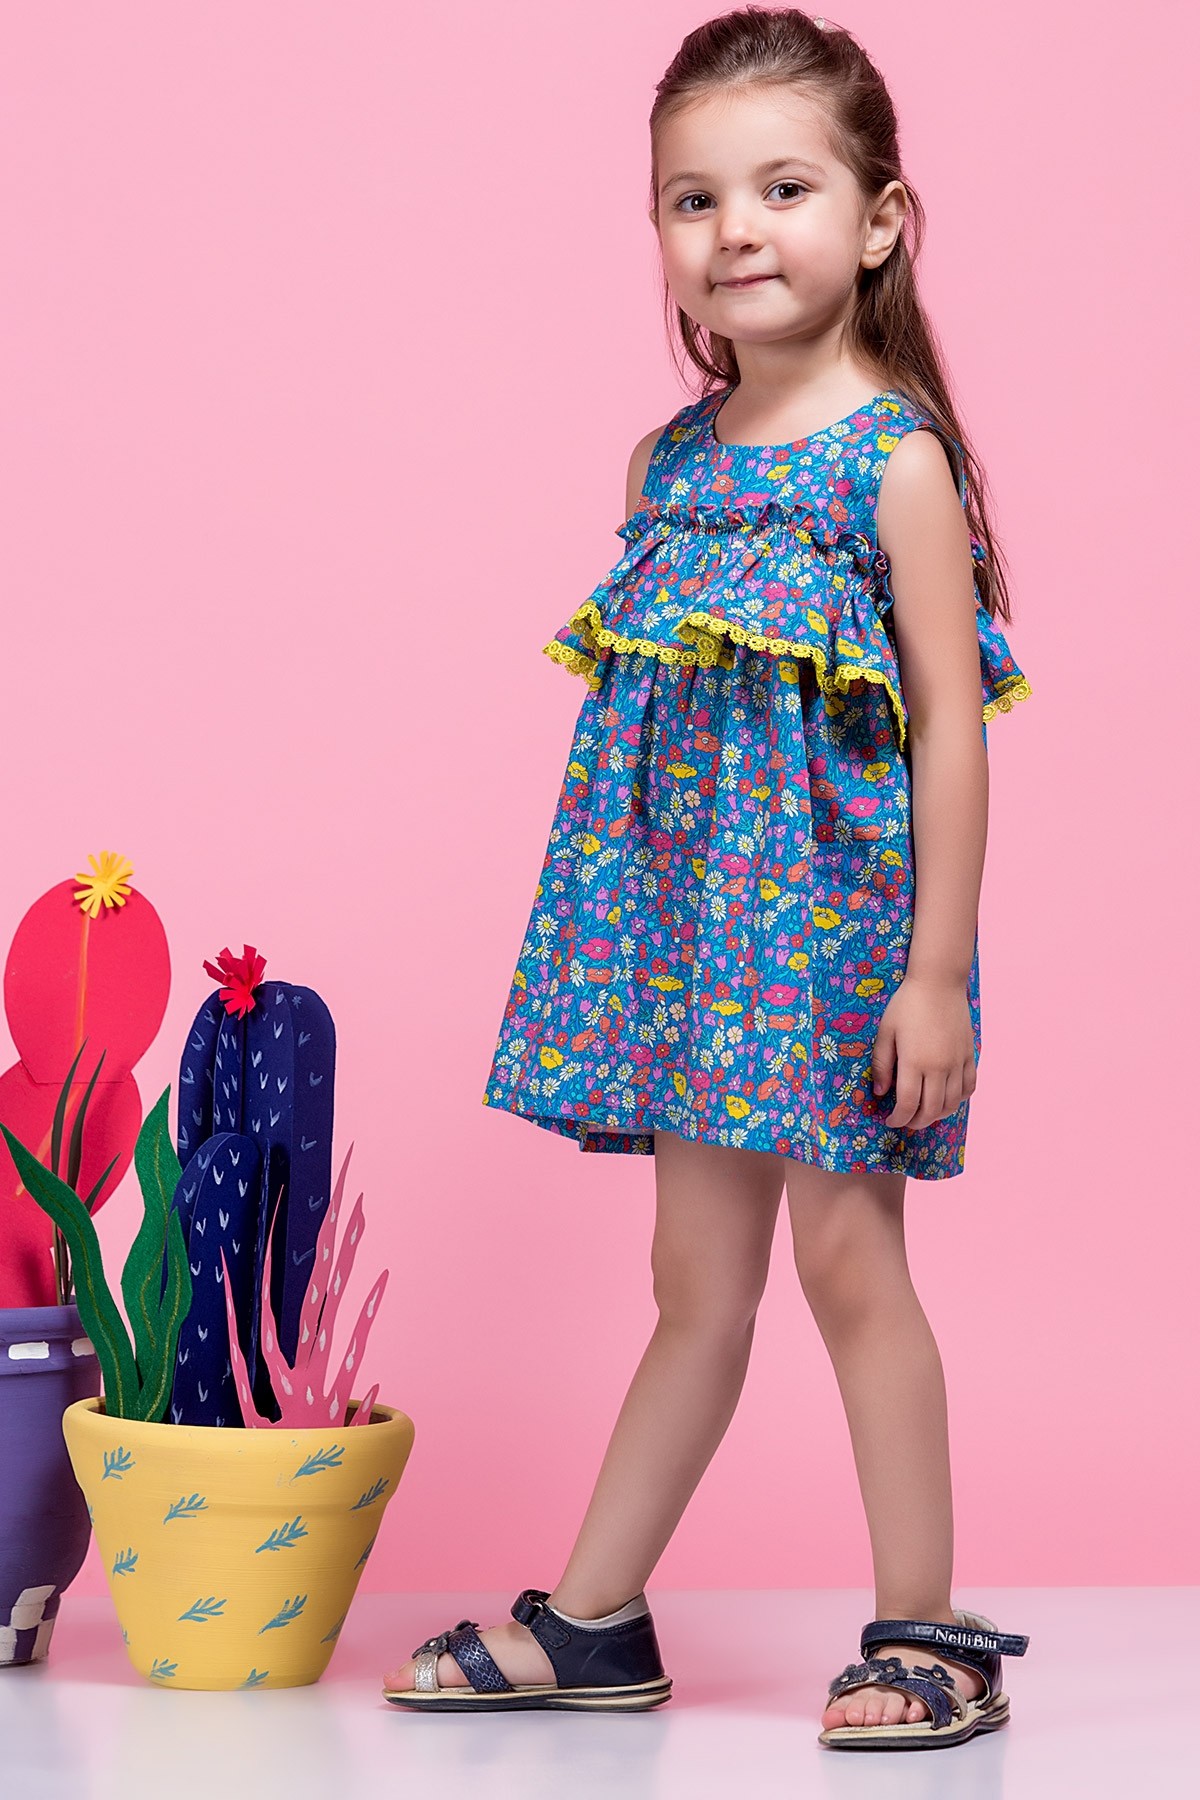 High Quality Baby Girl Dresses Frock Design Linen Fabric Wholesale Kids  Clothing Girls Dress - China Pinafore and Girls Dresses price |  Made-in-China.com